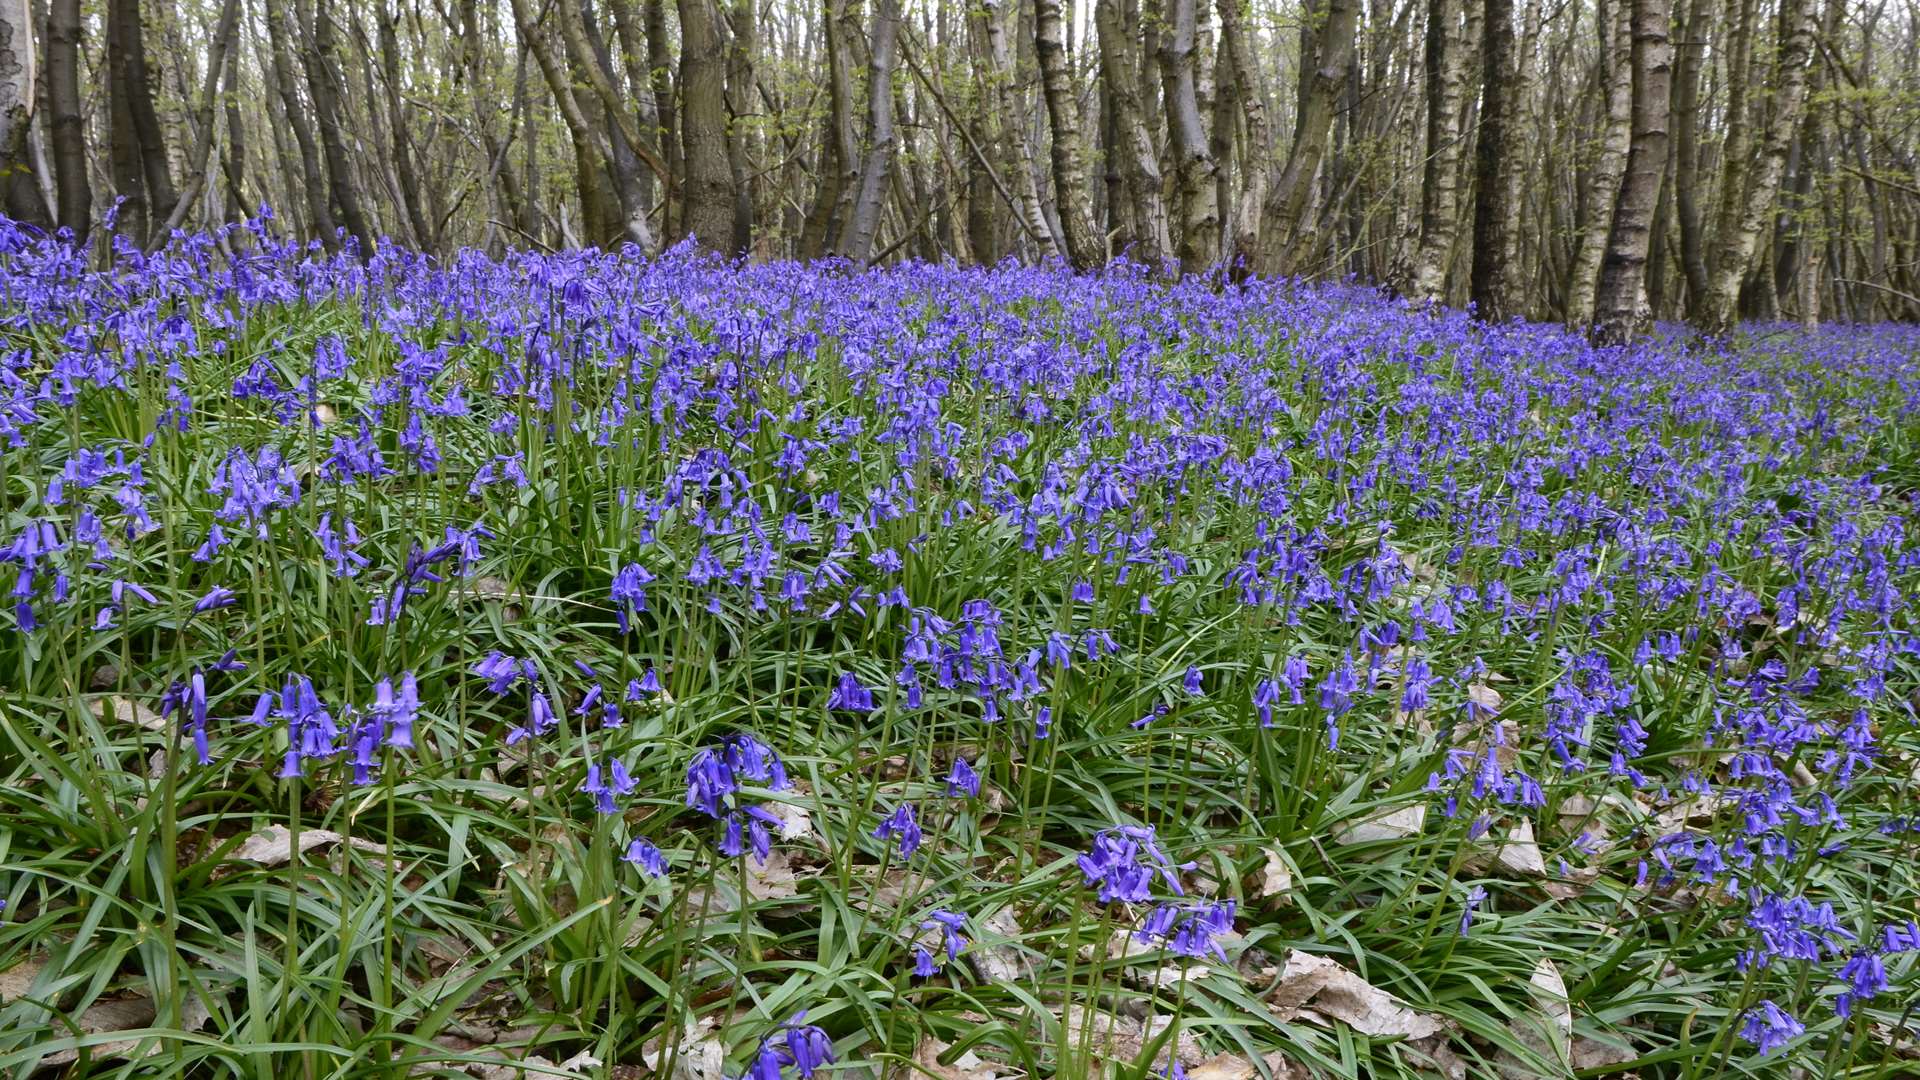 Carpet of bluebells in Kings Wood, Challock. Picture By Gary Browne